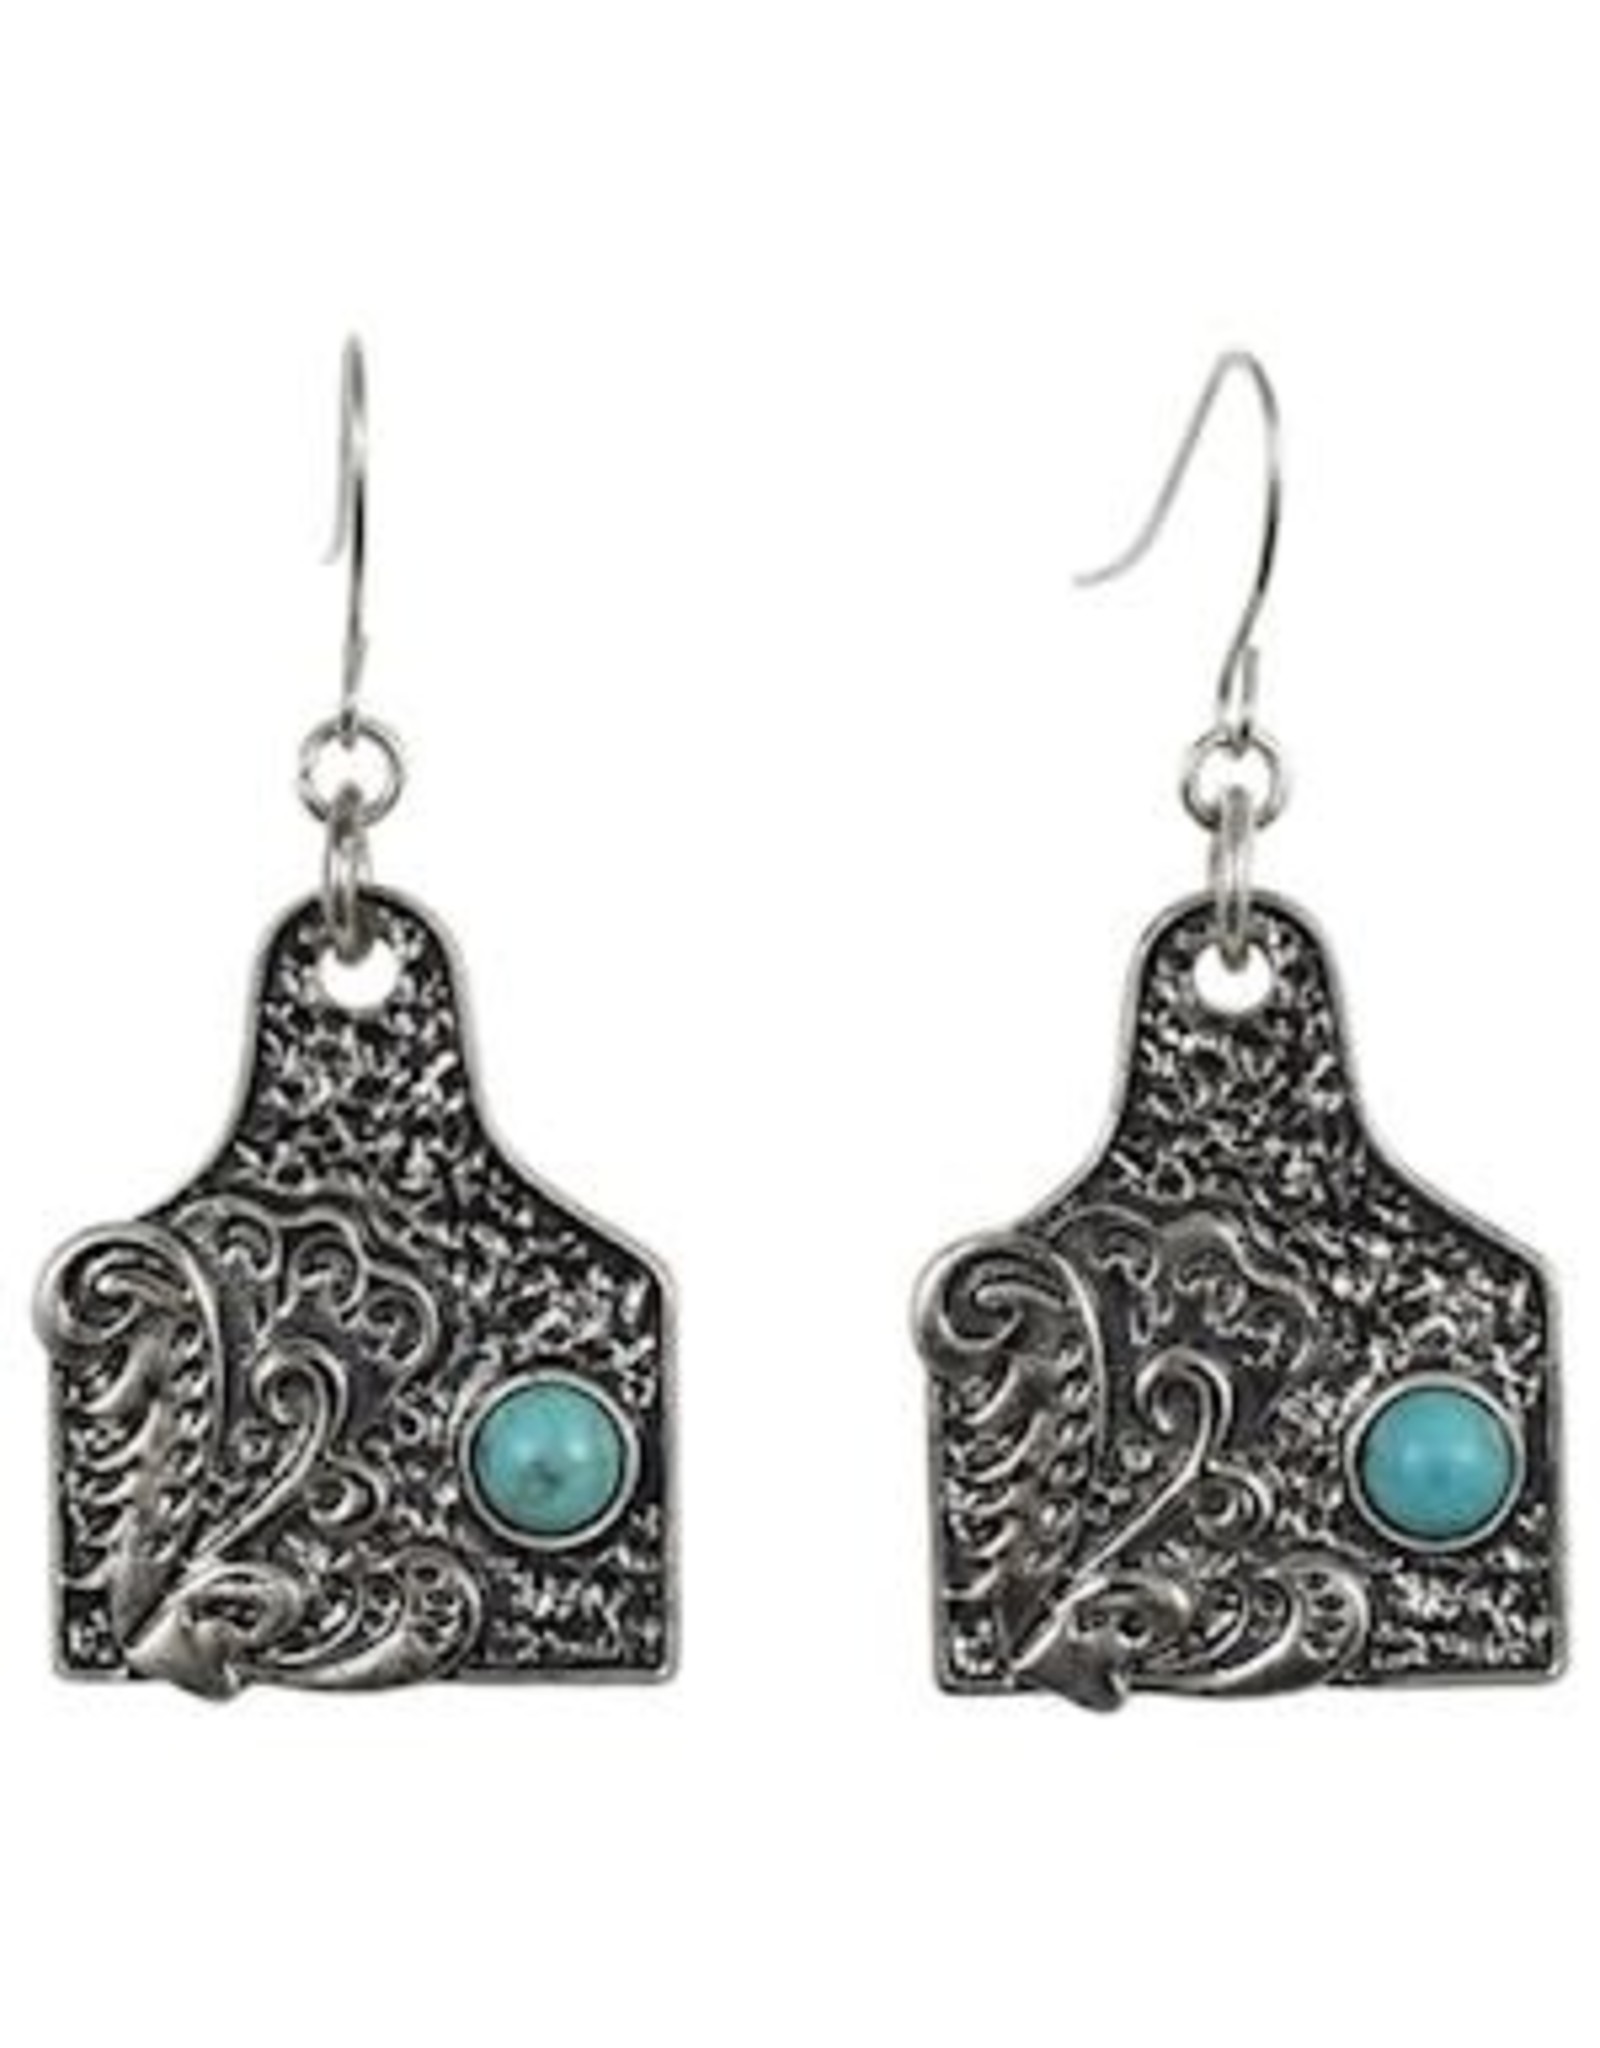 Justin Justin Turquoise Cowtag Earrings 23022EJ1